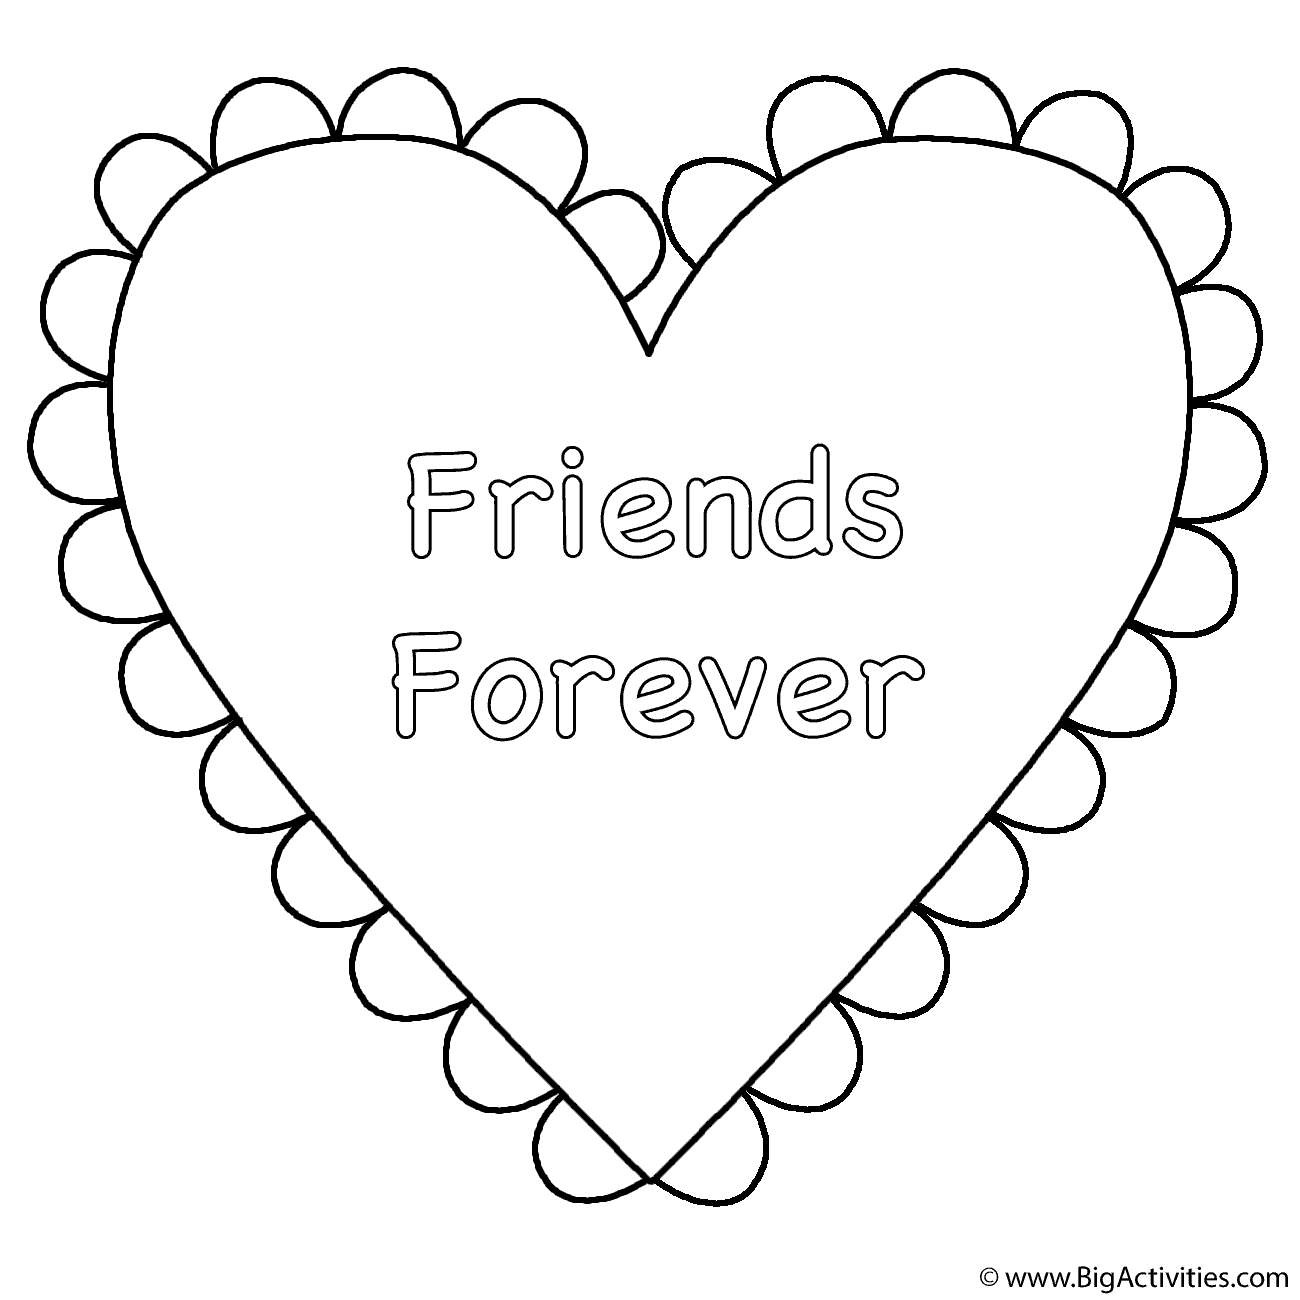 Heart (Friends Forever) - Coloring Page (Valentine's Day)